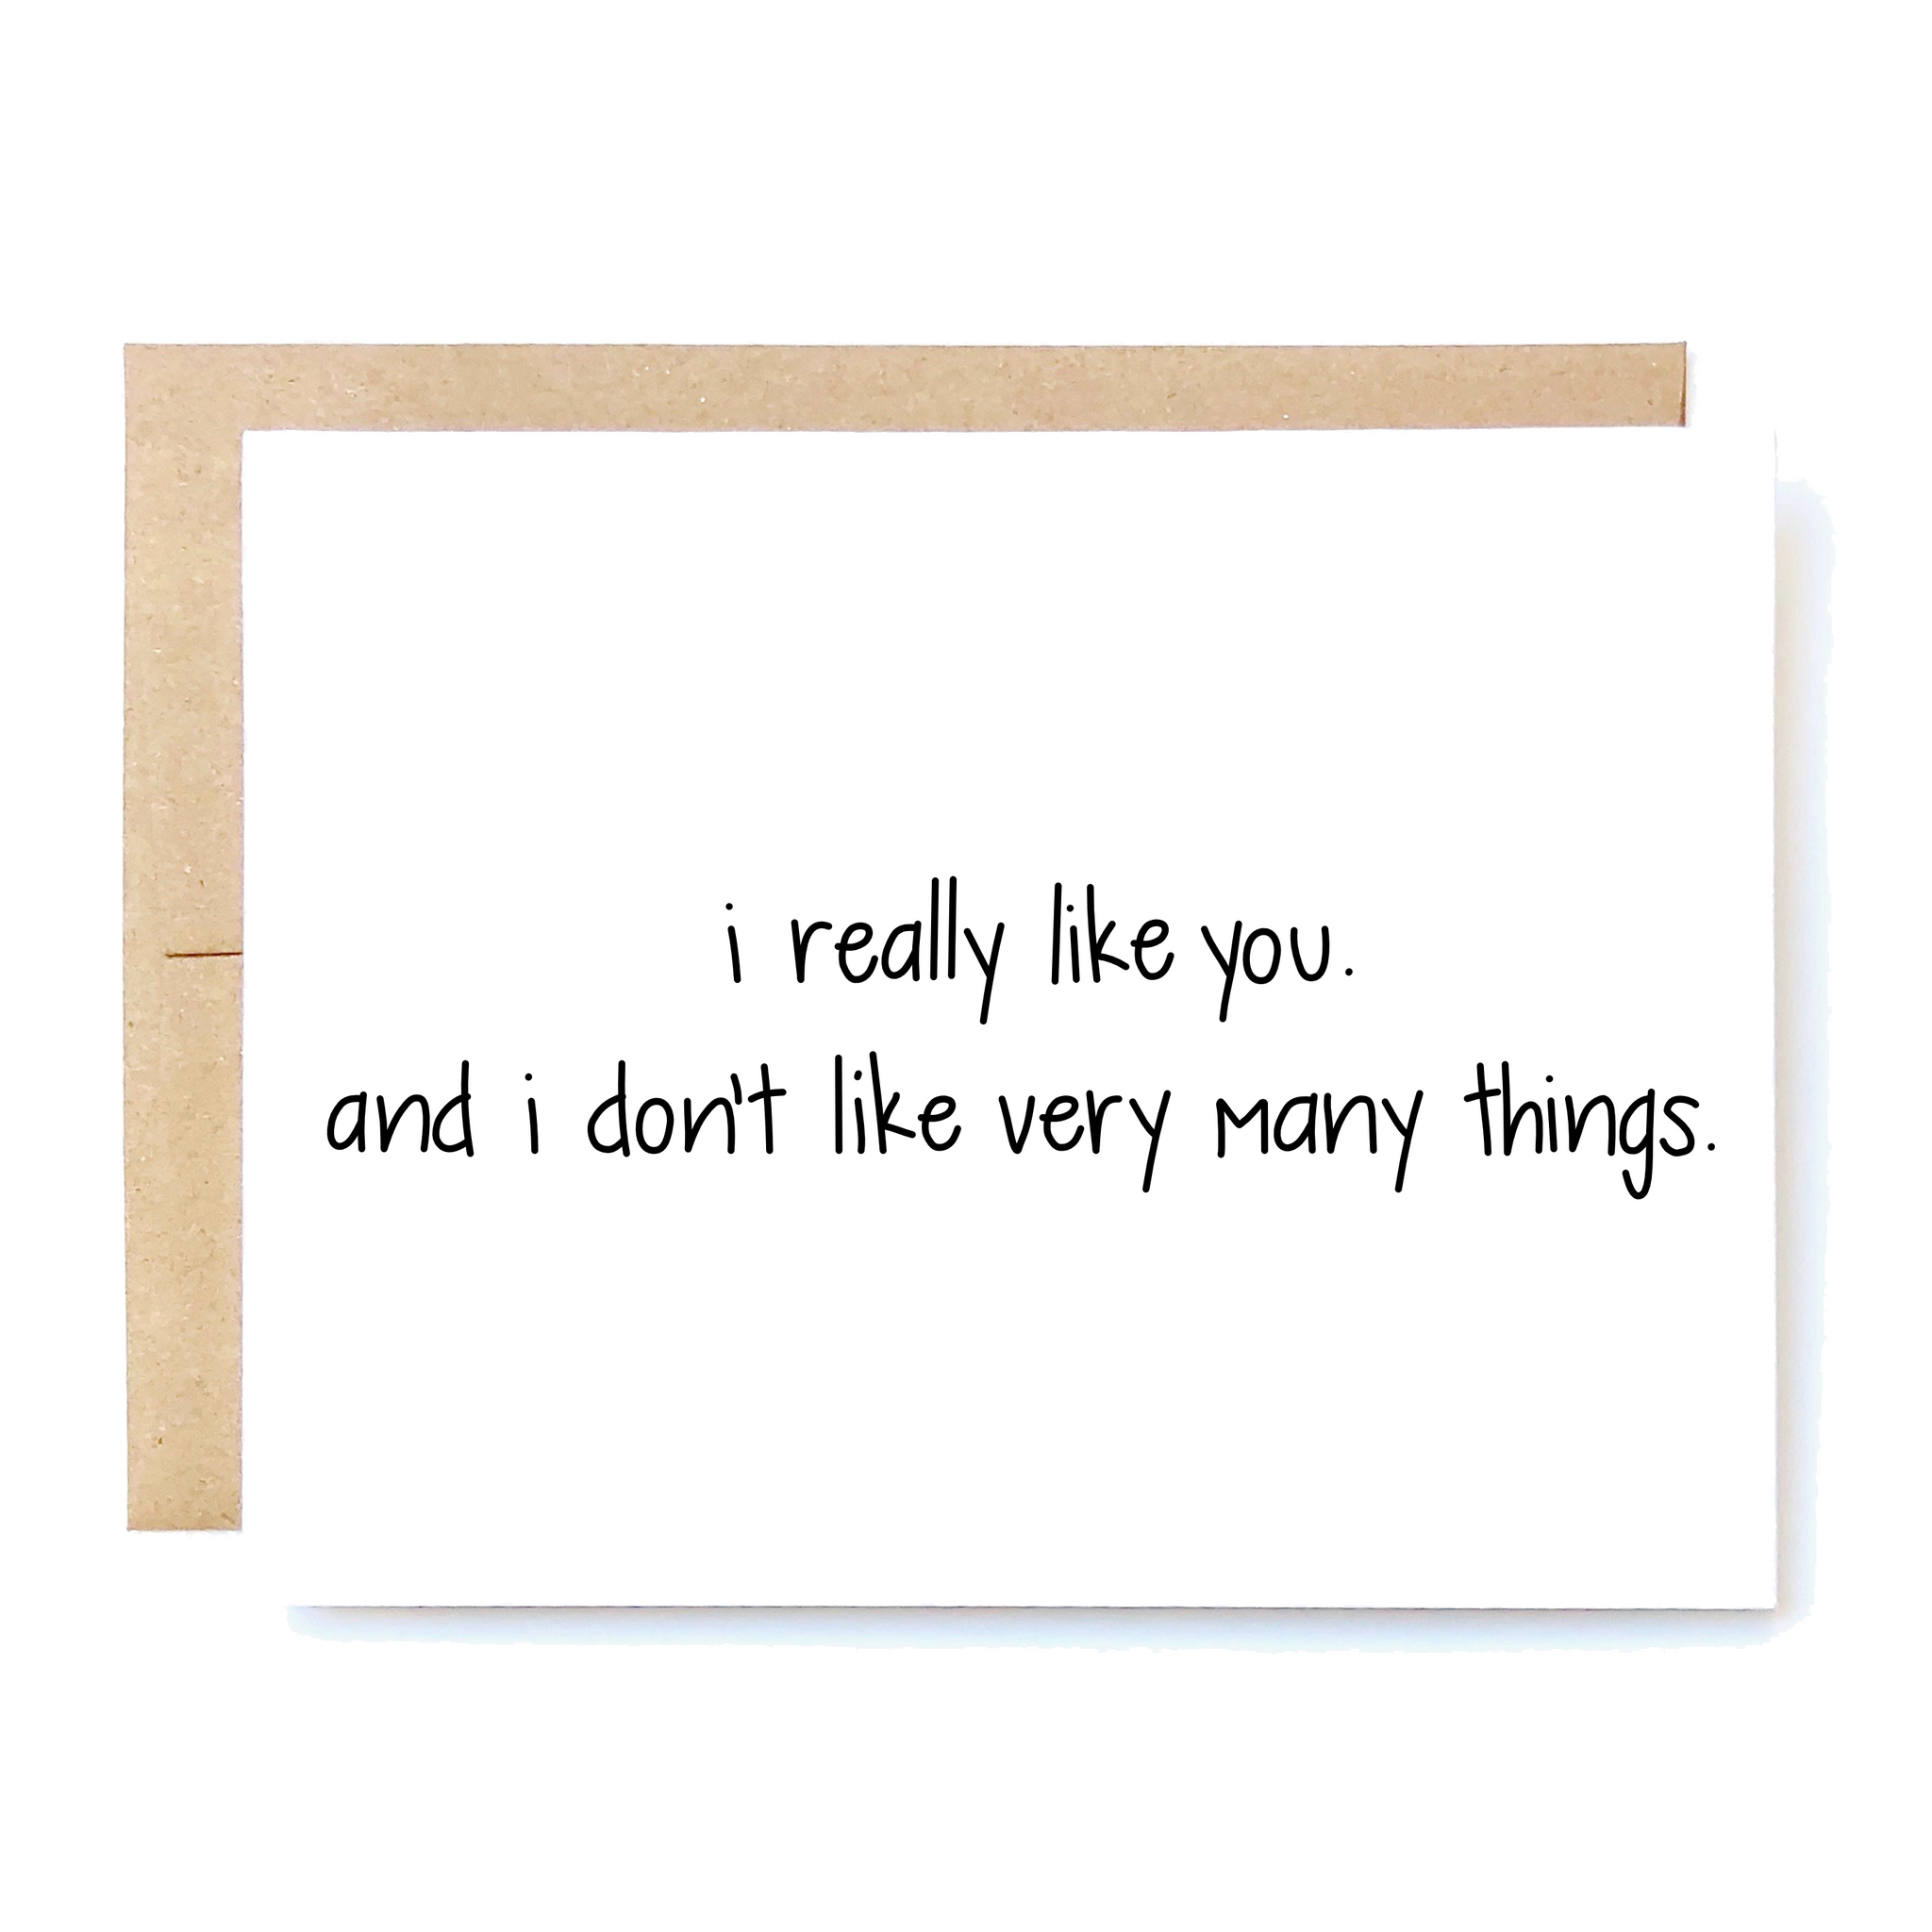 Card Front: I really like you. And I don't like very many things.